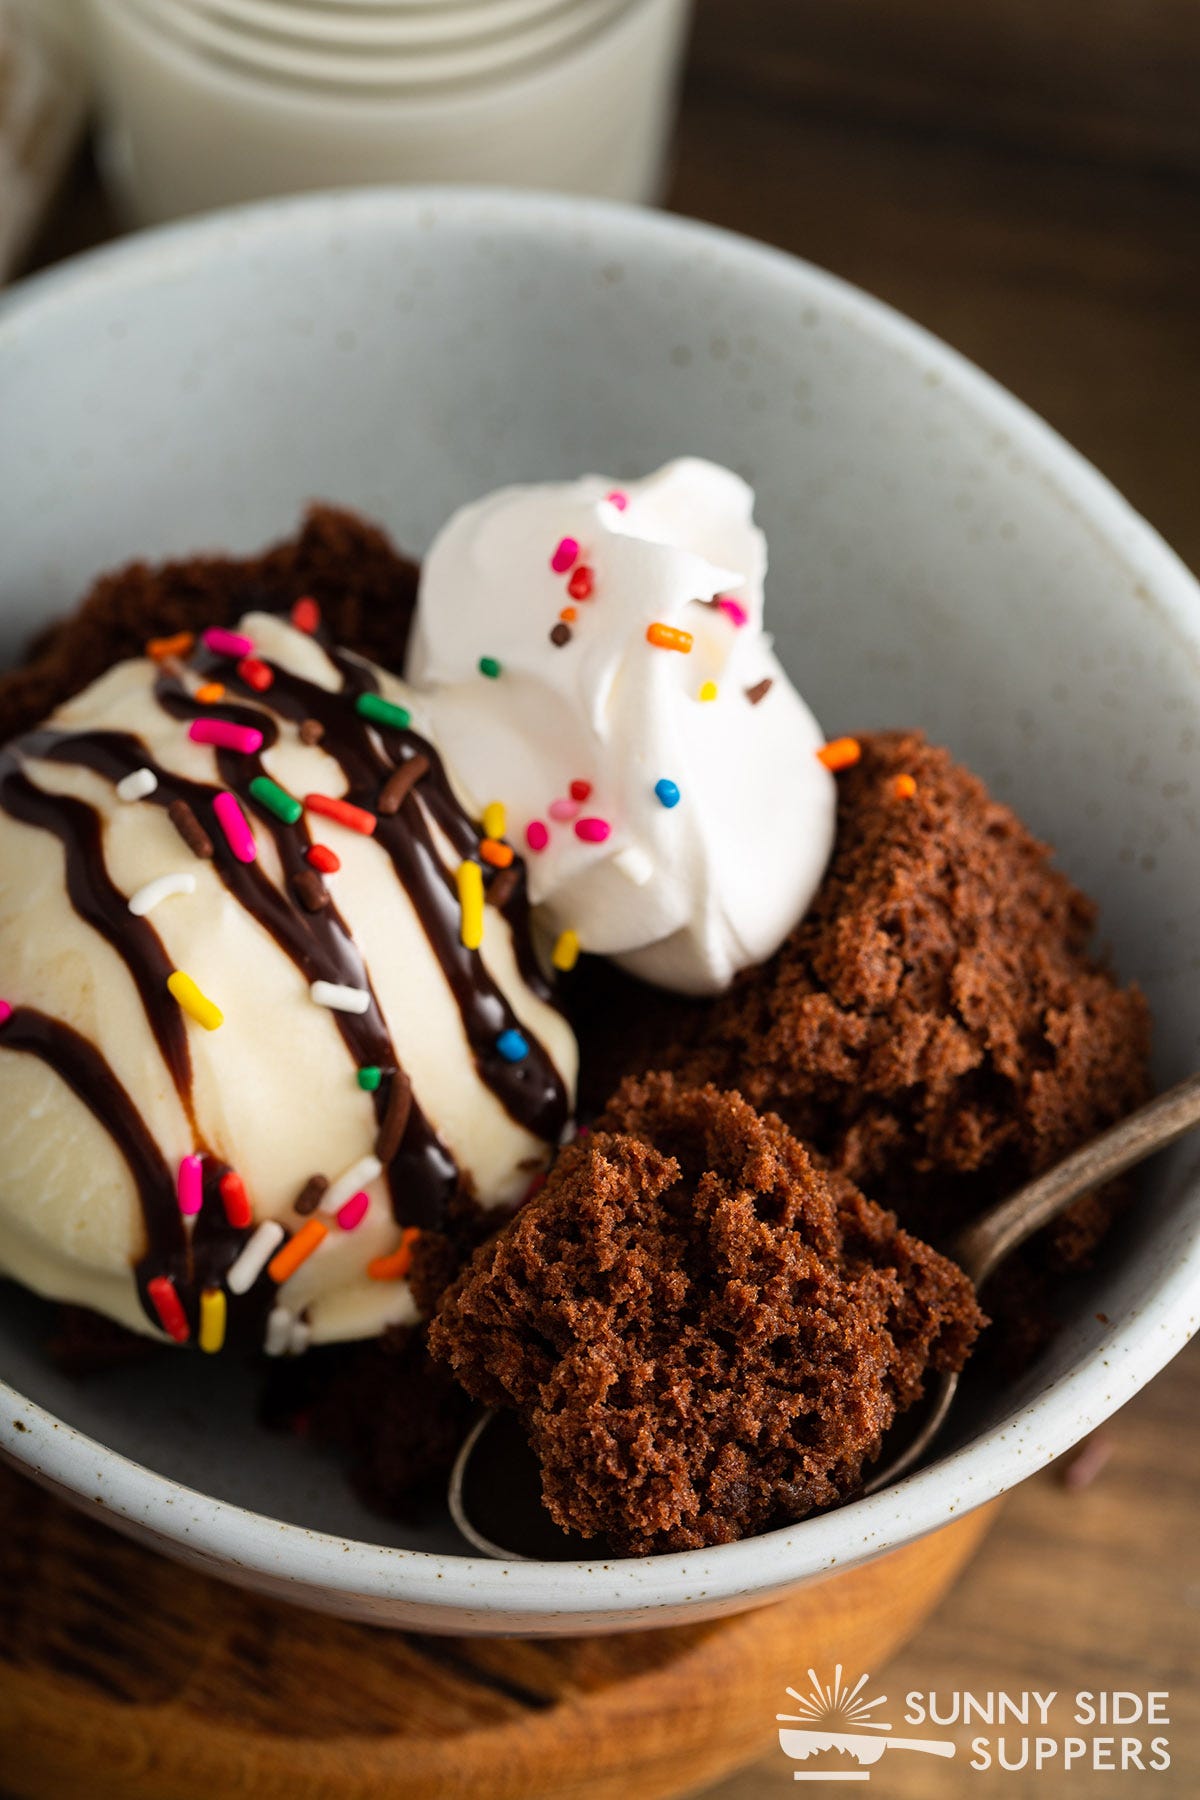 Chocolate cake in a bowl with ice cream and whipped cream.